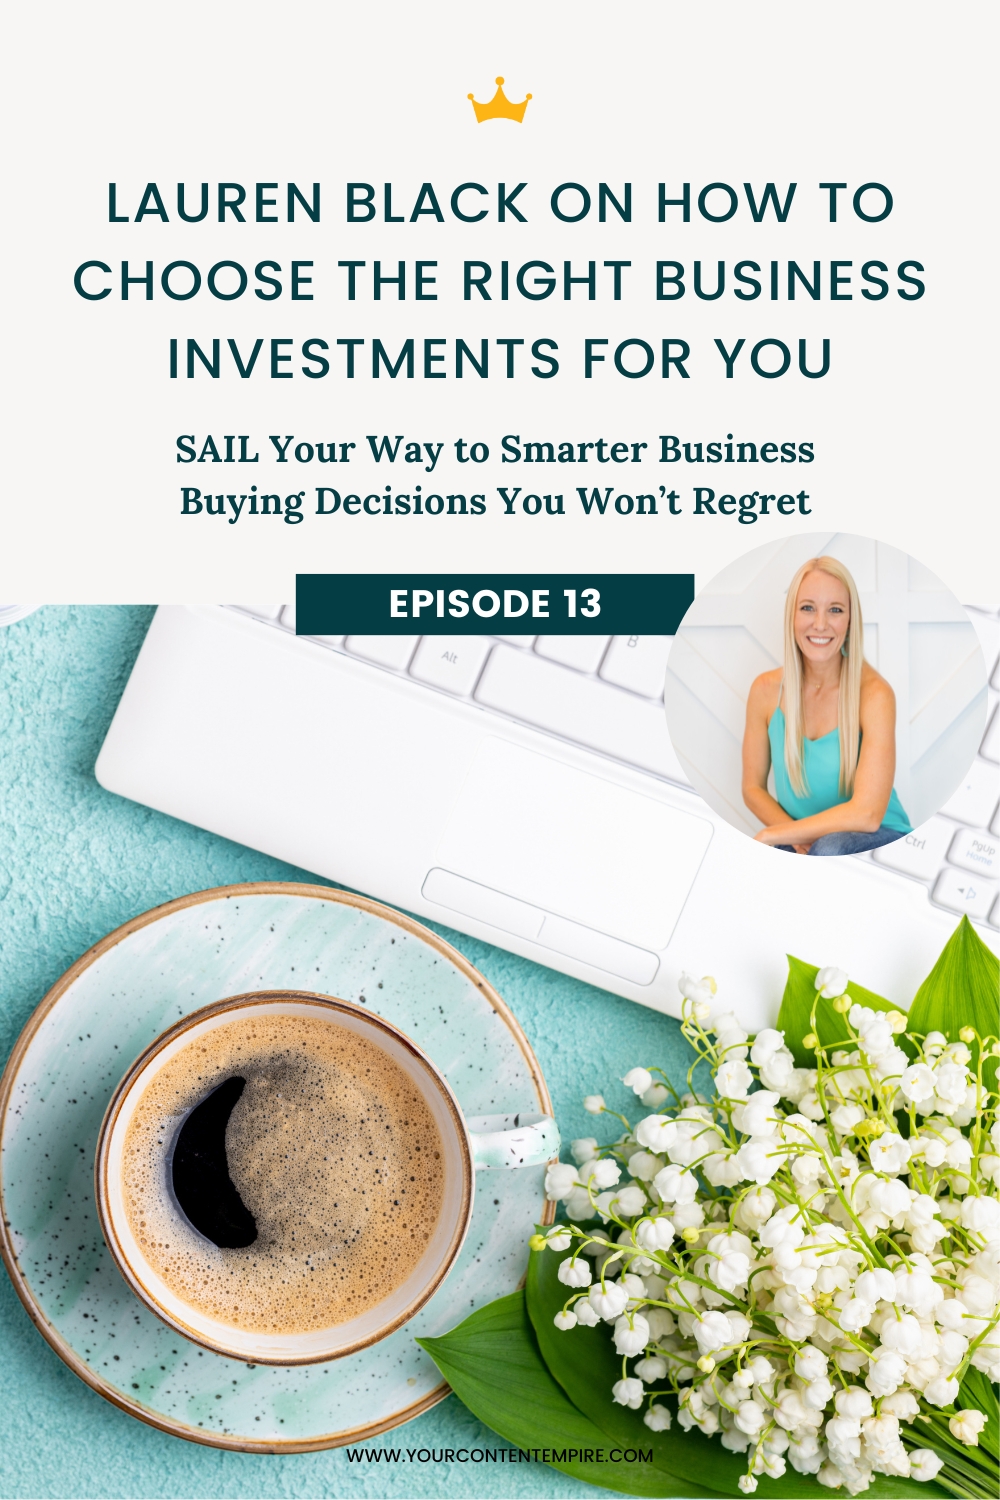 Lauren Black on How to Choose the Right Business Investments for You